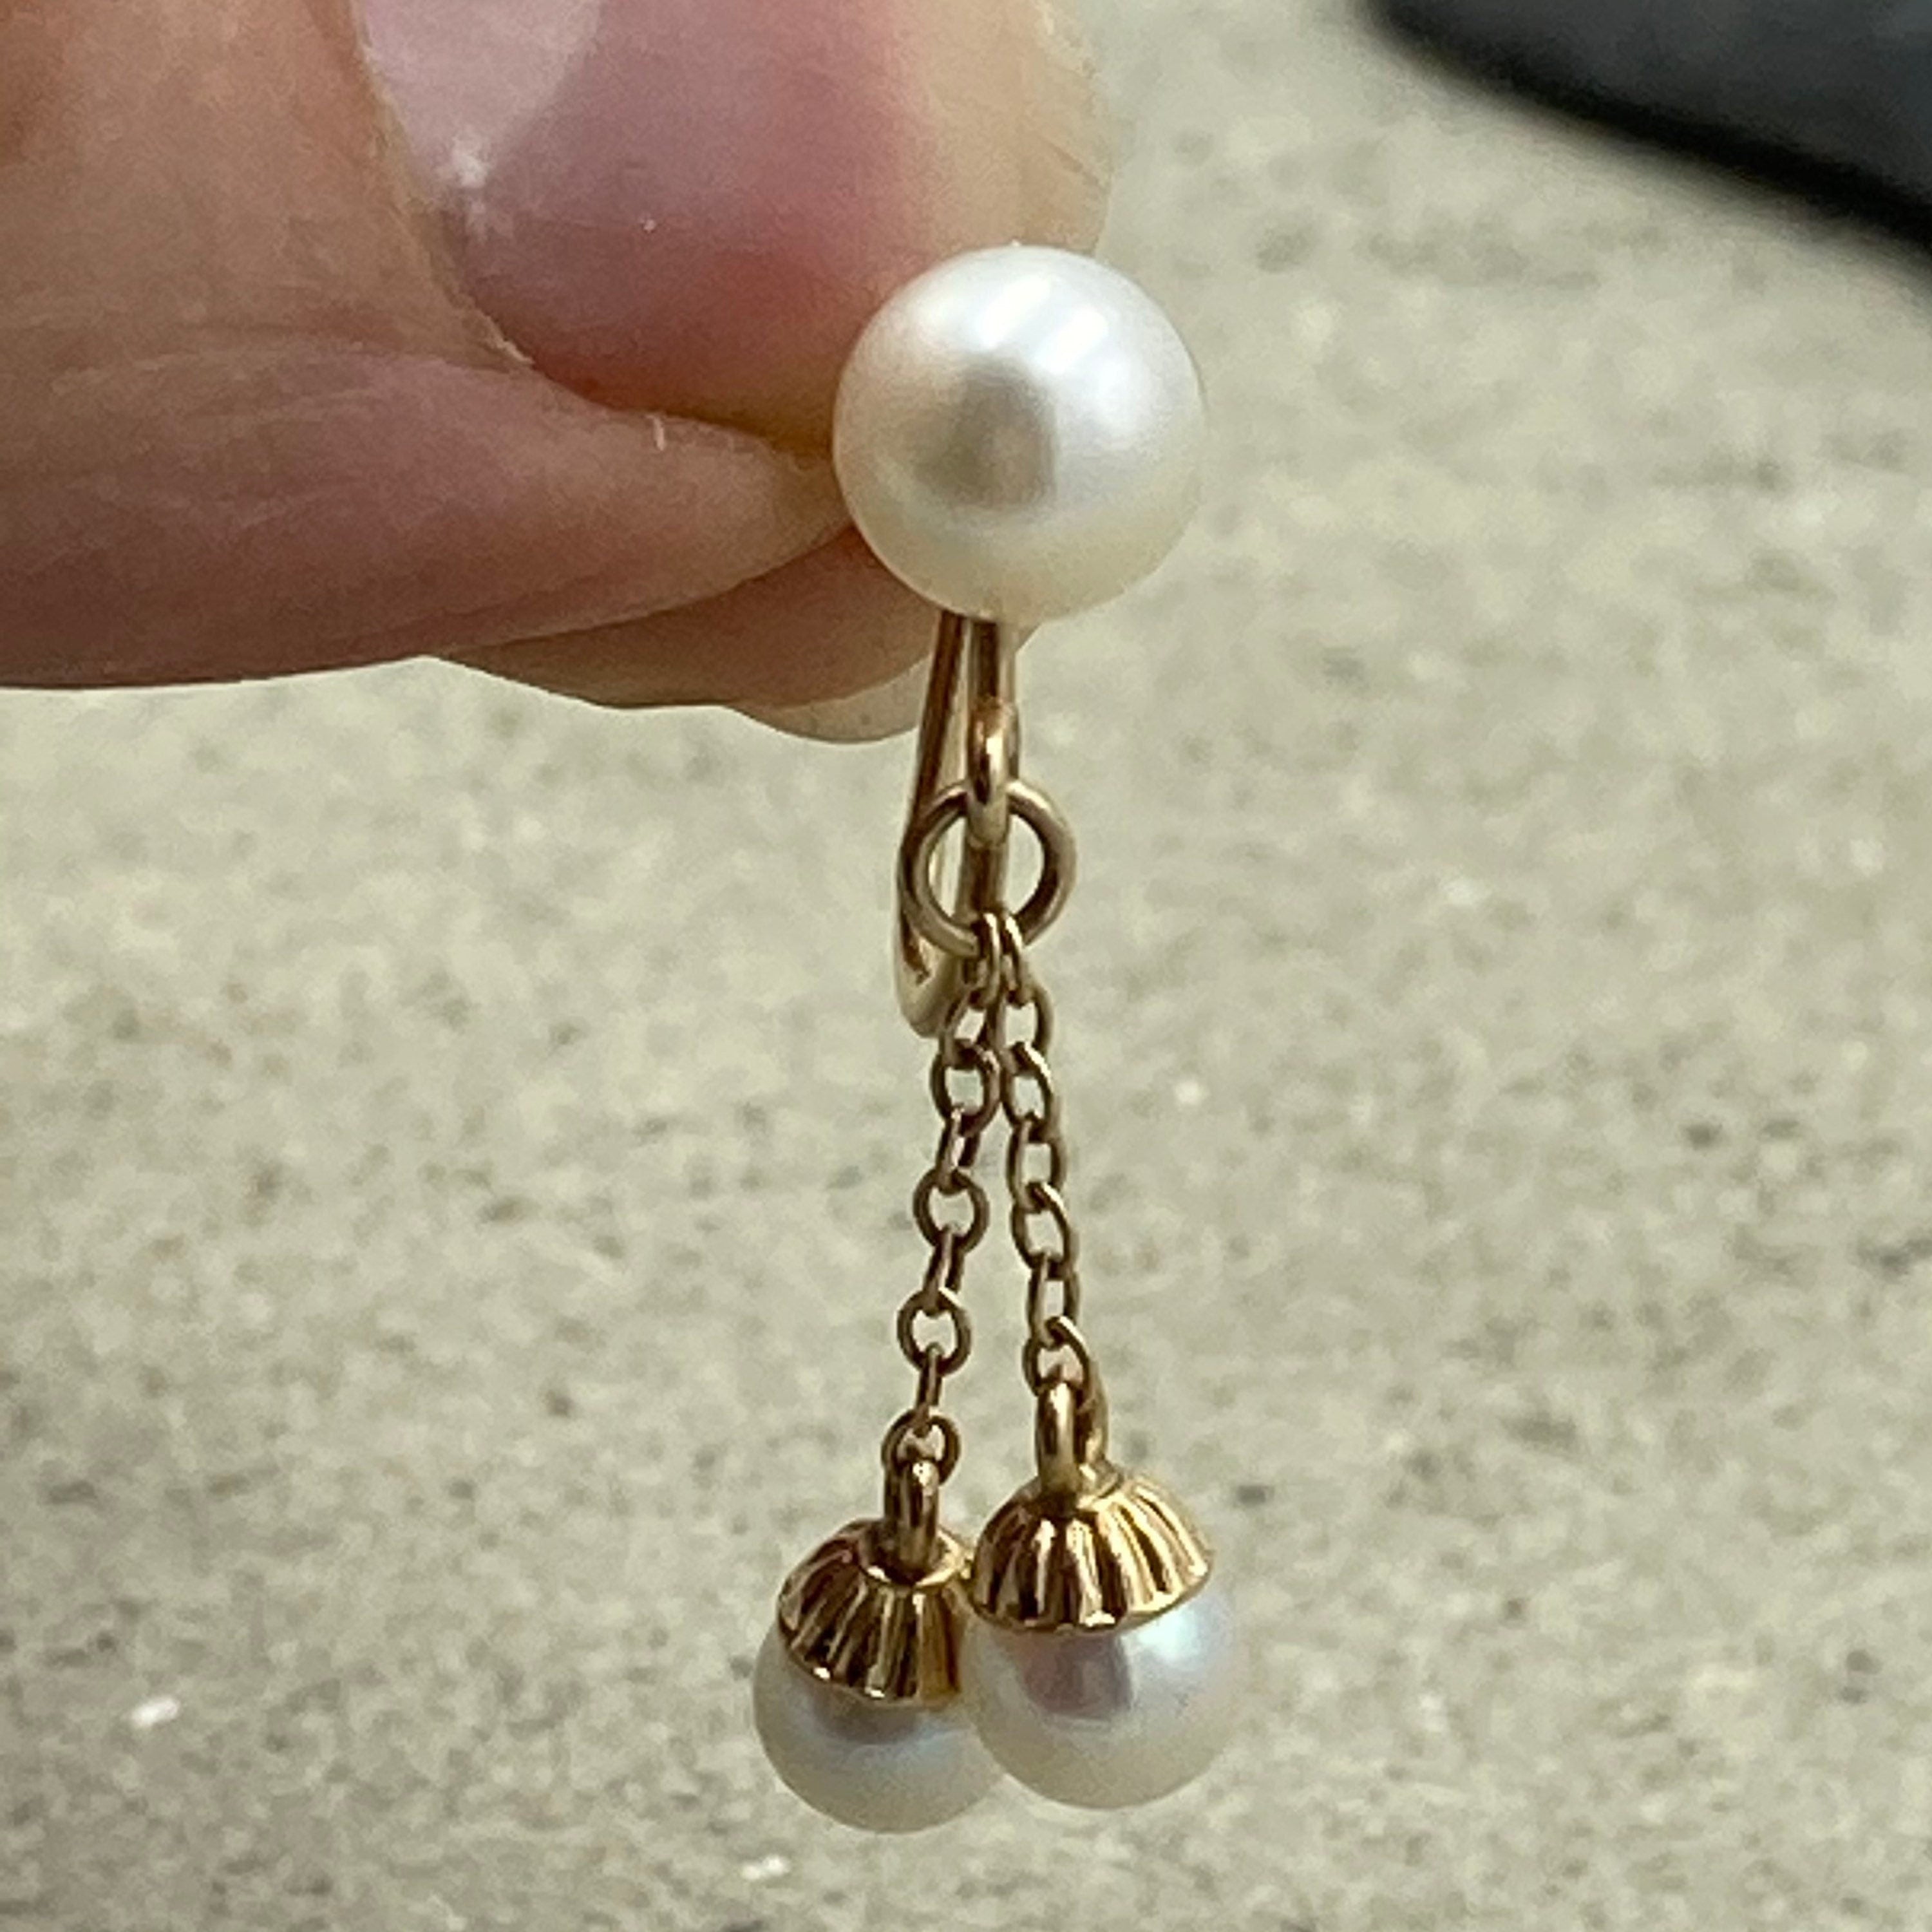 Vintage 14ct gold cultured pearl dangly screw back earrings 14k gold